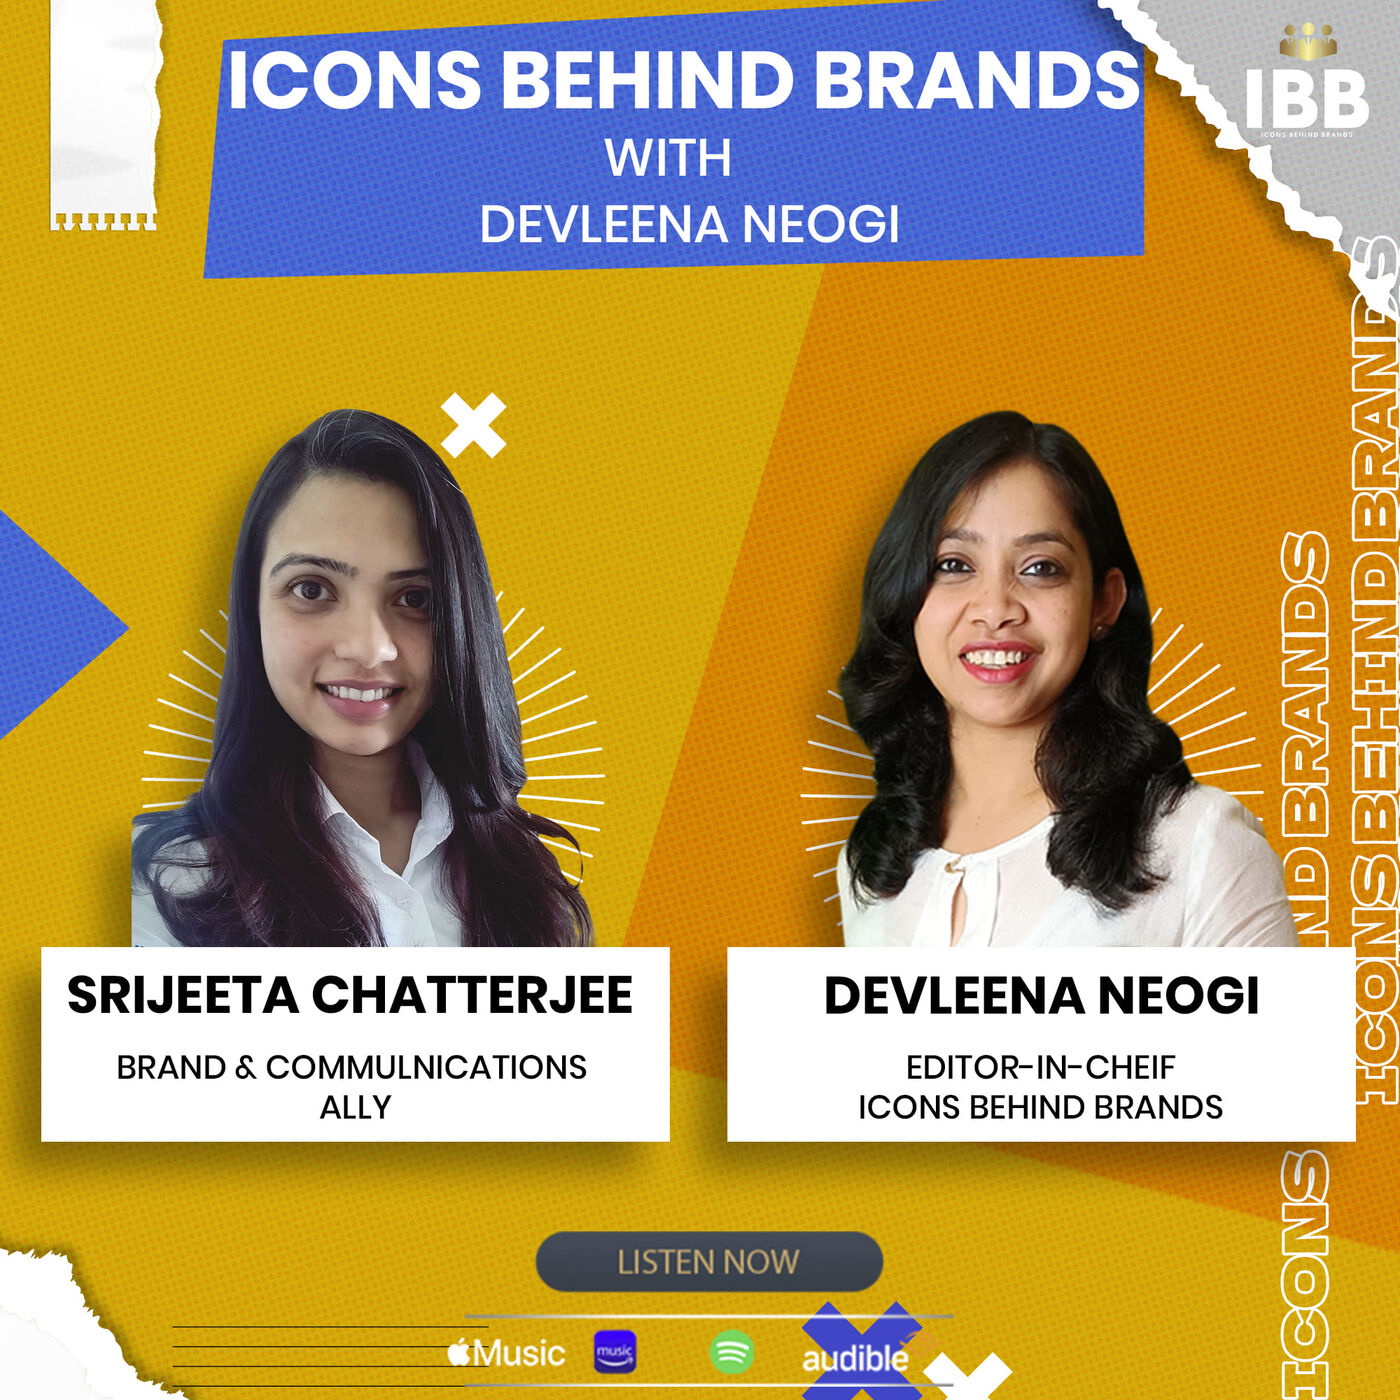 Have an amazing glimpse of the next episode in line, in conversation with Ms. Srijeeta Chatterjee Brand and Communications Lead, Shell India